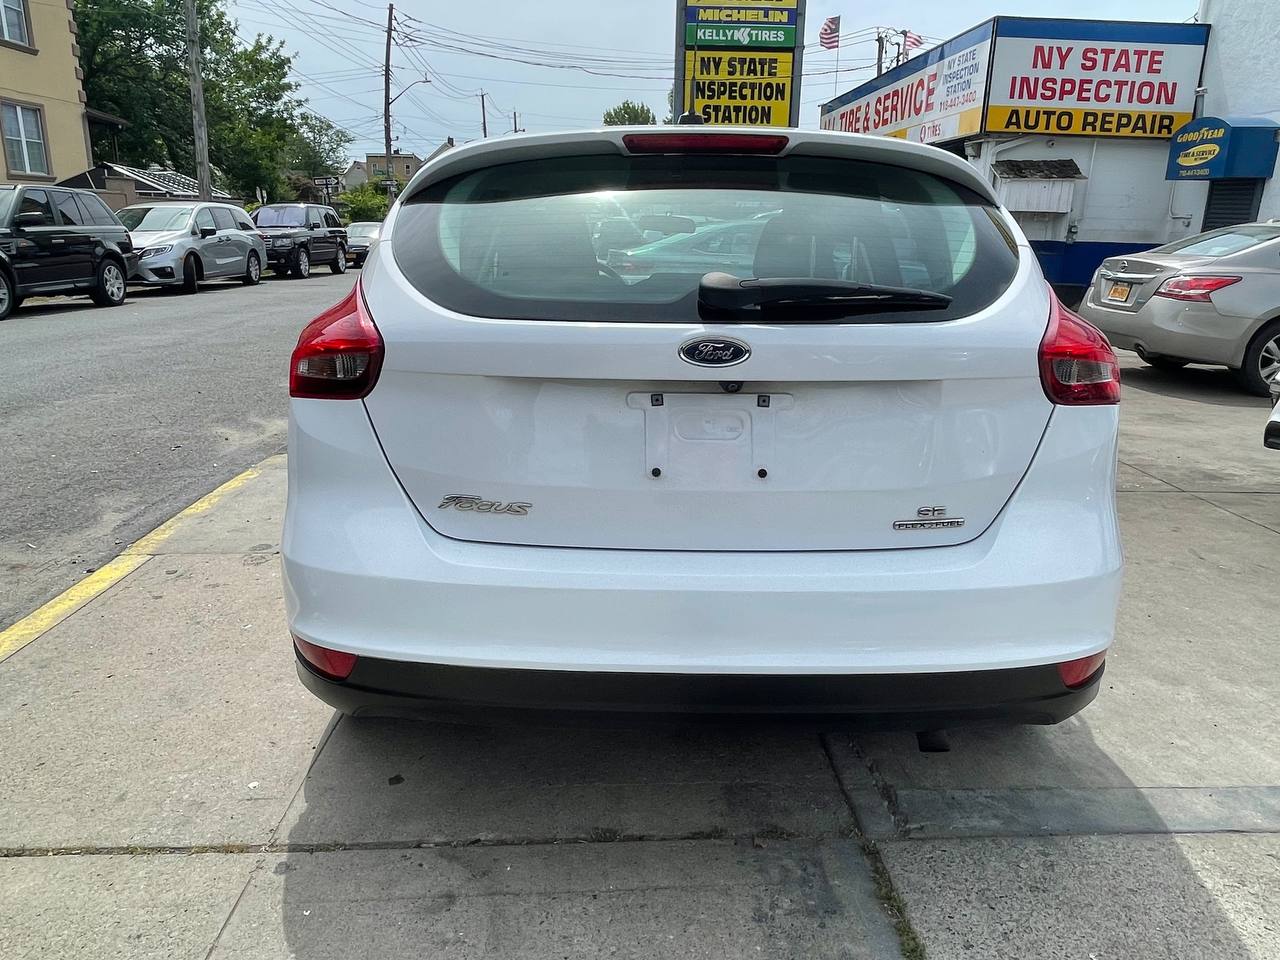 Used - Ford Focus SE Hatchback for sale in Staten Island NY